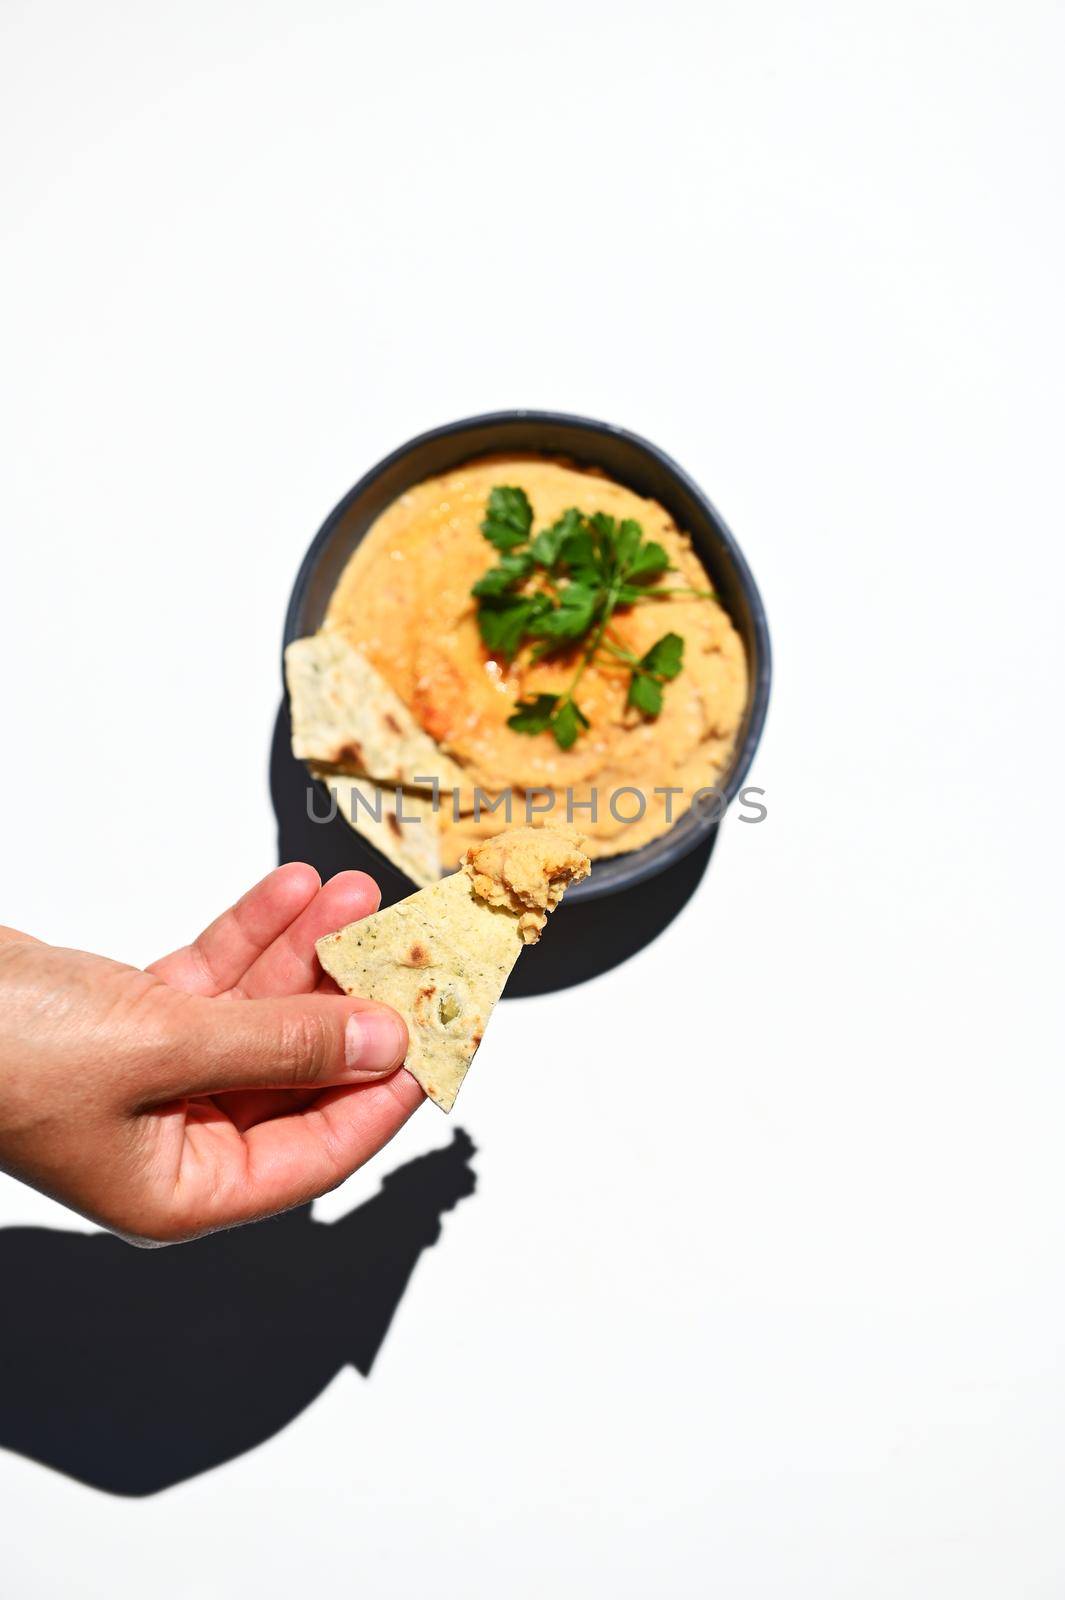 Overhead view. Vertical studio shot of a hand, dipping pita bread into a creamy consistency vegan dish - oriental hummus with parsley in blue ceramic bowl, isolated on white background.